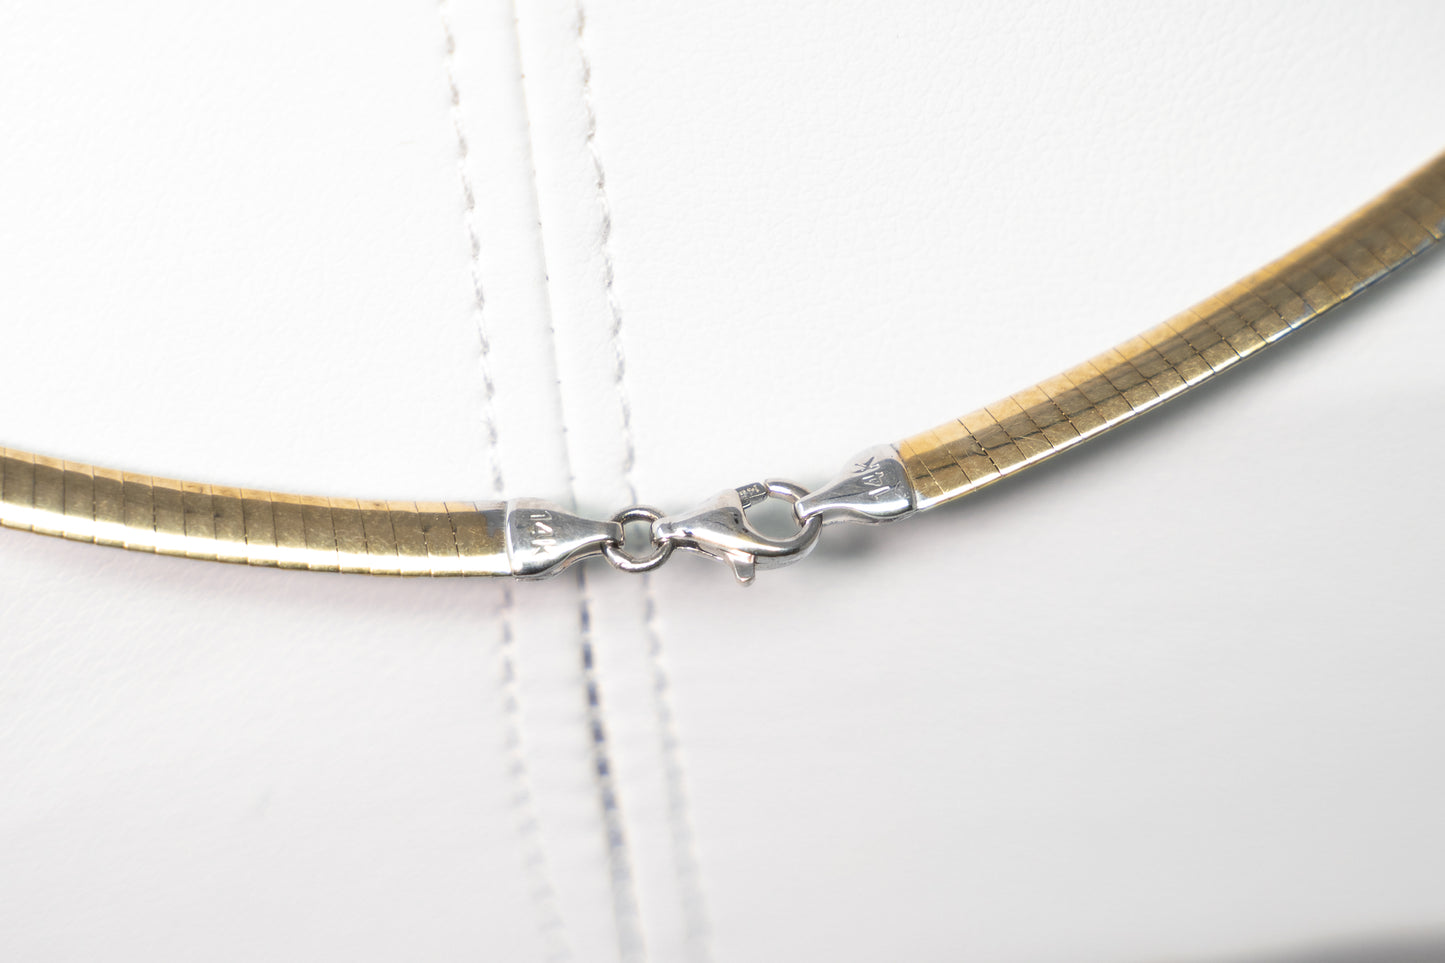 Reversible 14k Yellow and White Gold Omega Necklace